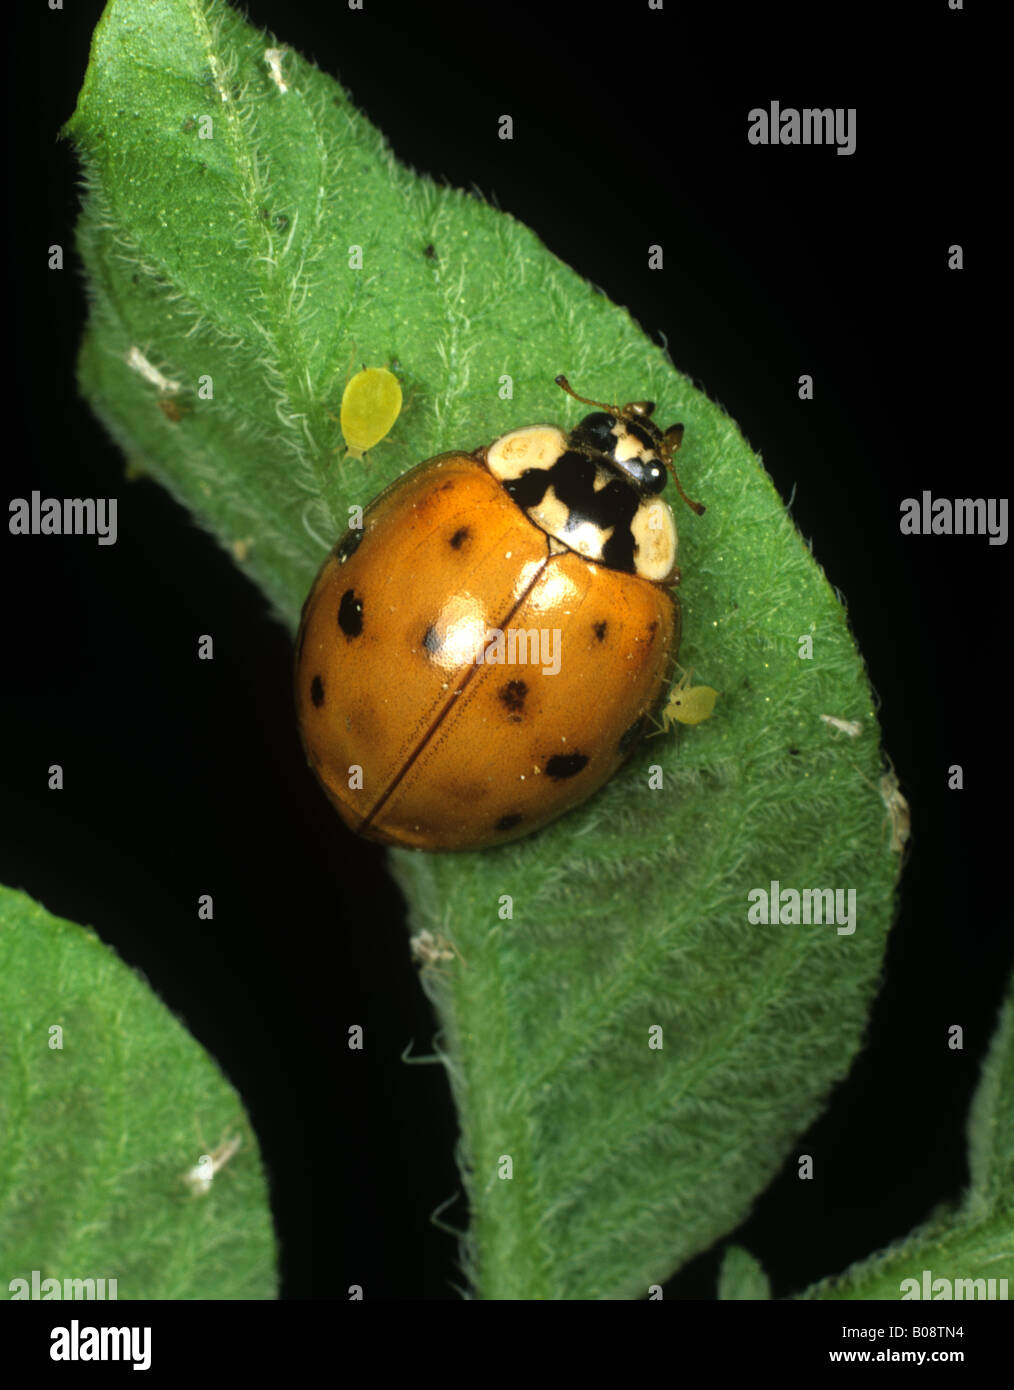 Harlequin or Asian ladybird Harmonia axyridis spotted form a threat to native ladybird species Stock Photo